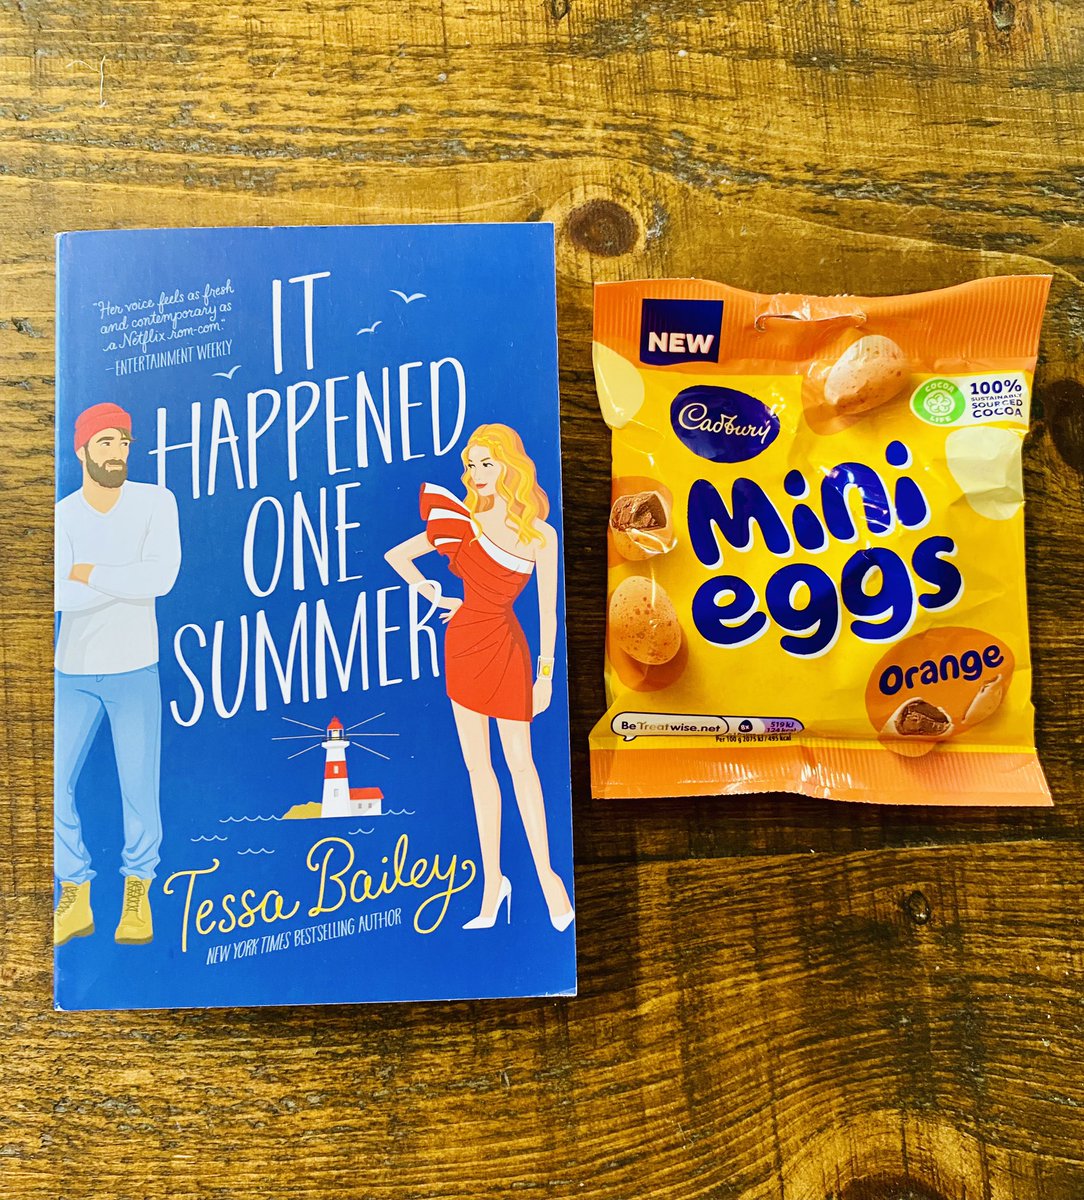 Happy Saturday! Here is a new giveaway on a sunny weekend. Win a copy of It Happened One Summer and a packet of orange mini eggs. Repost & follow to enter. UK only. Closes 15/01/23 at 11.59pm.